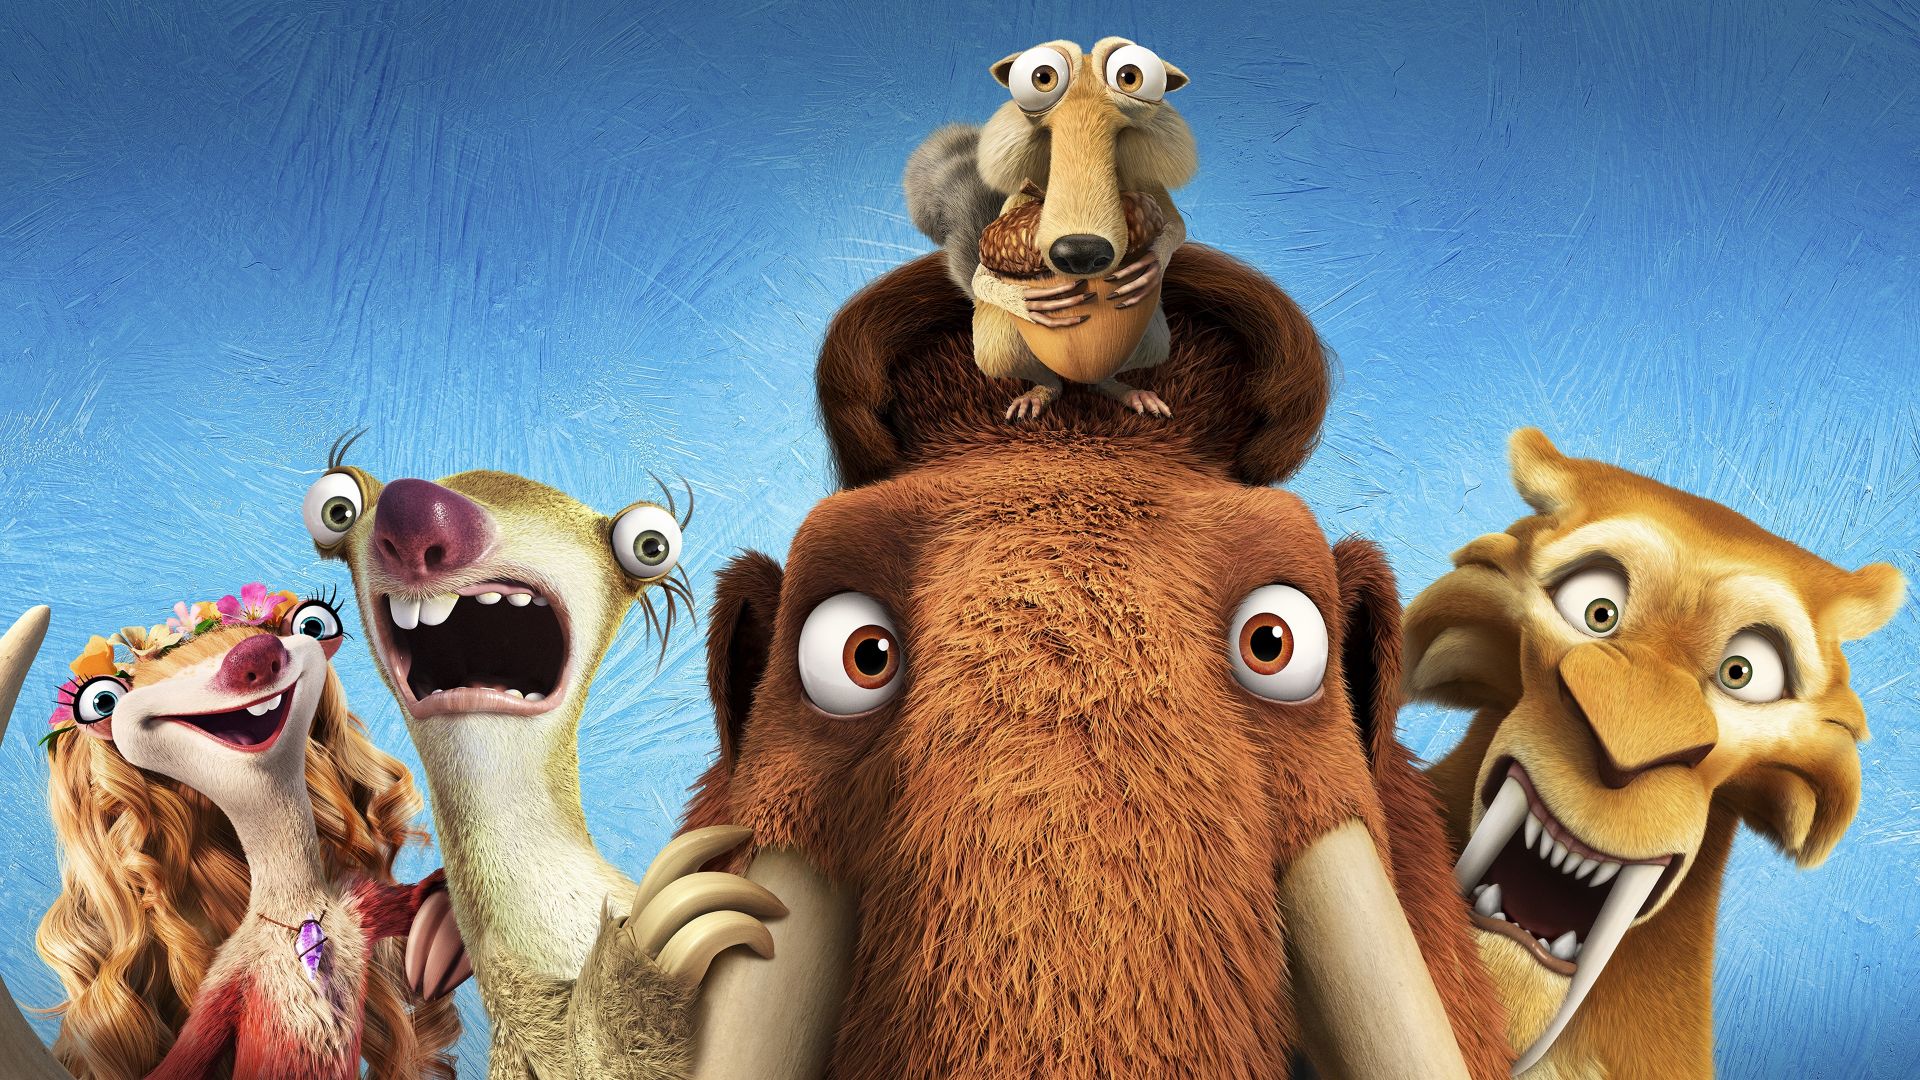 Ice Age 5: Collision Course, diego, manny, scrat, sid, mammoths, best animations of 2016 (horizontal)